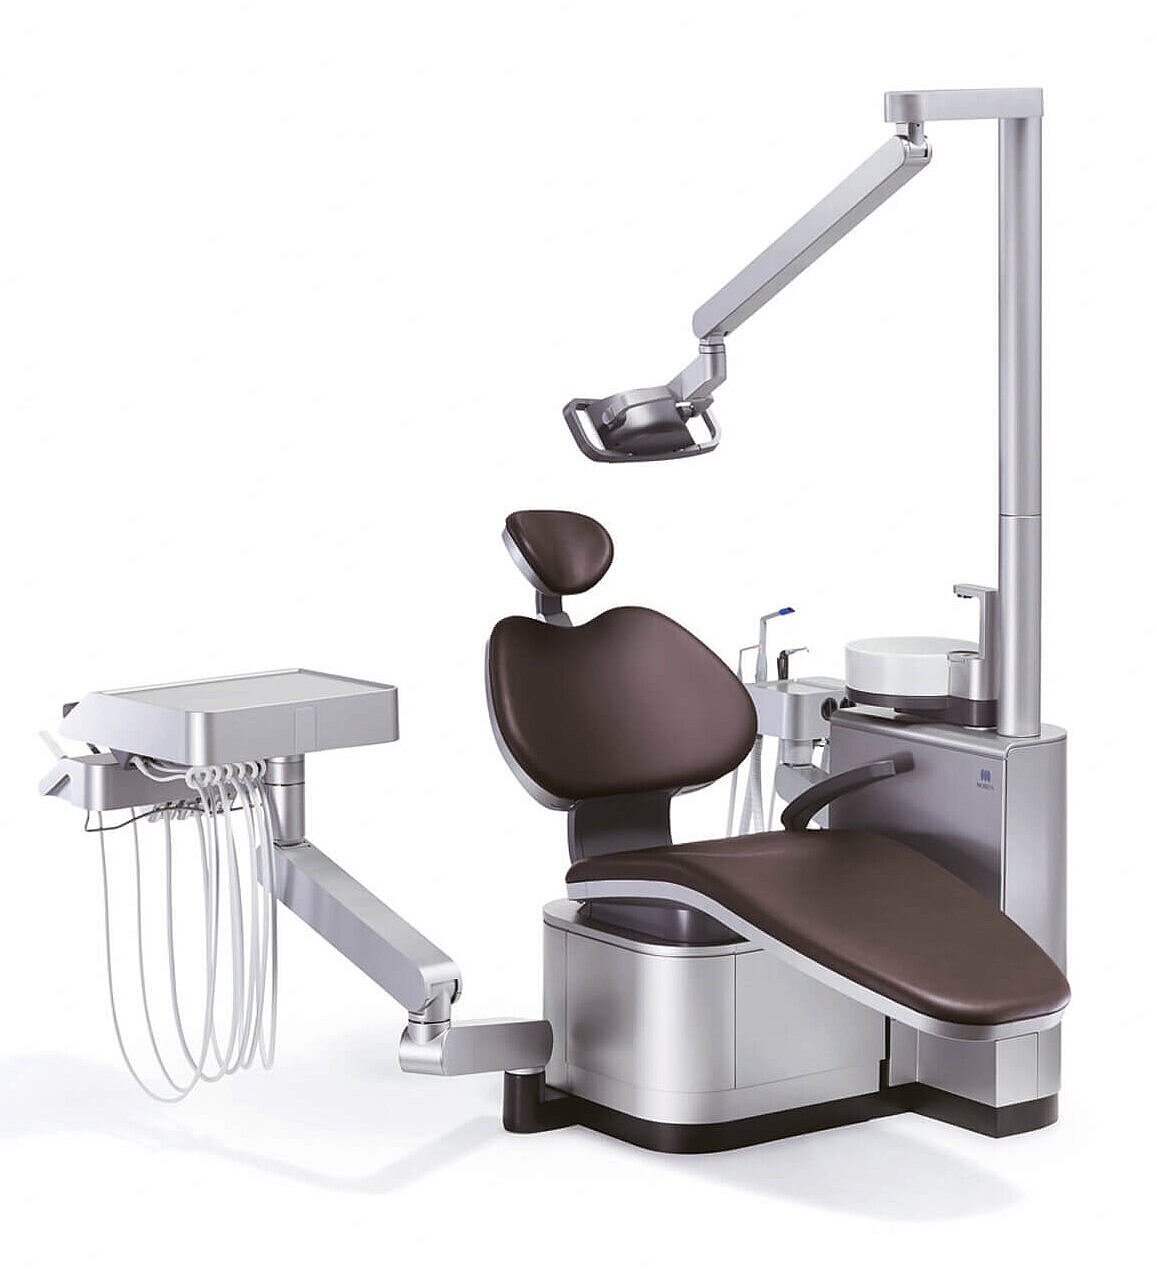 The dentist’s treatment chair “Signo T500” from Morita received a Red Dot: Best of the Best